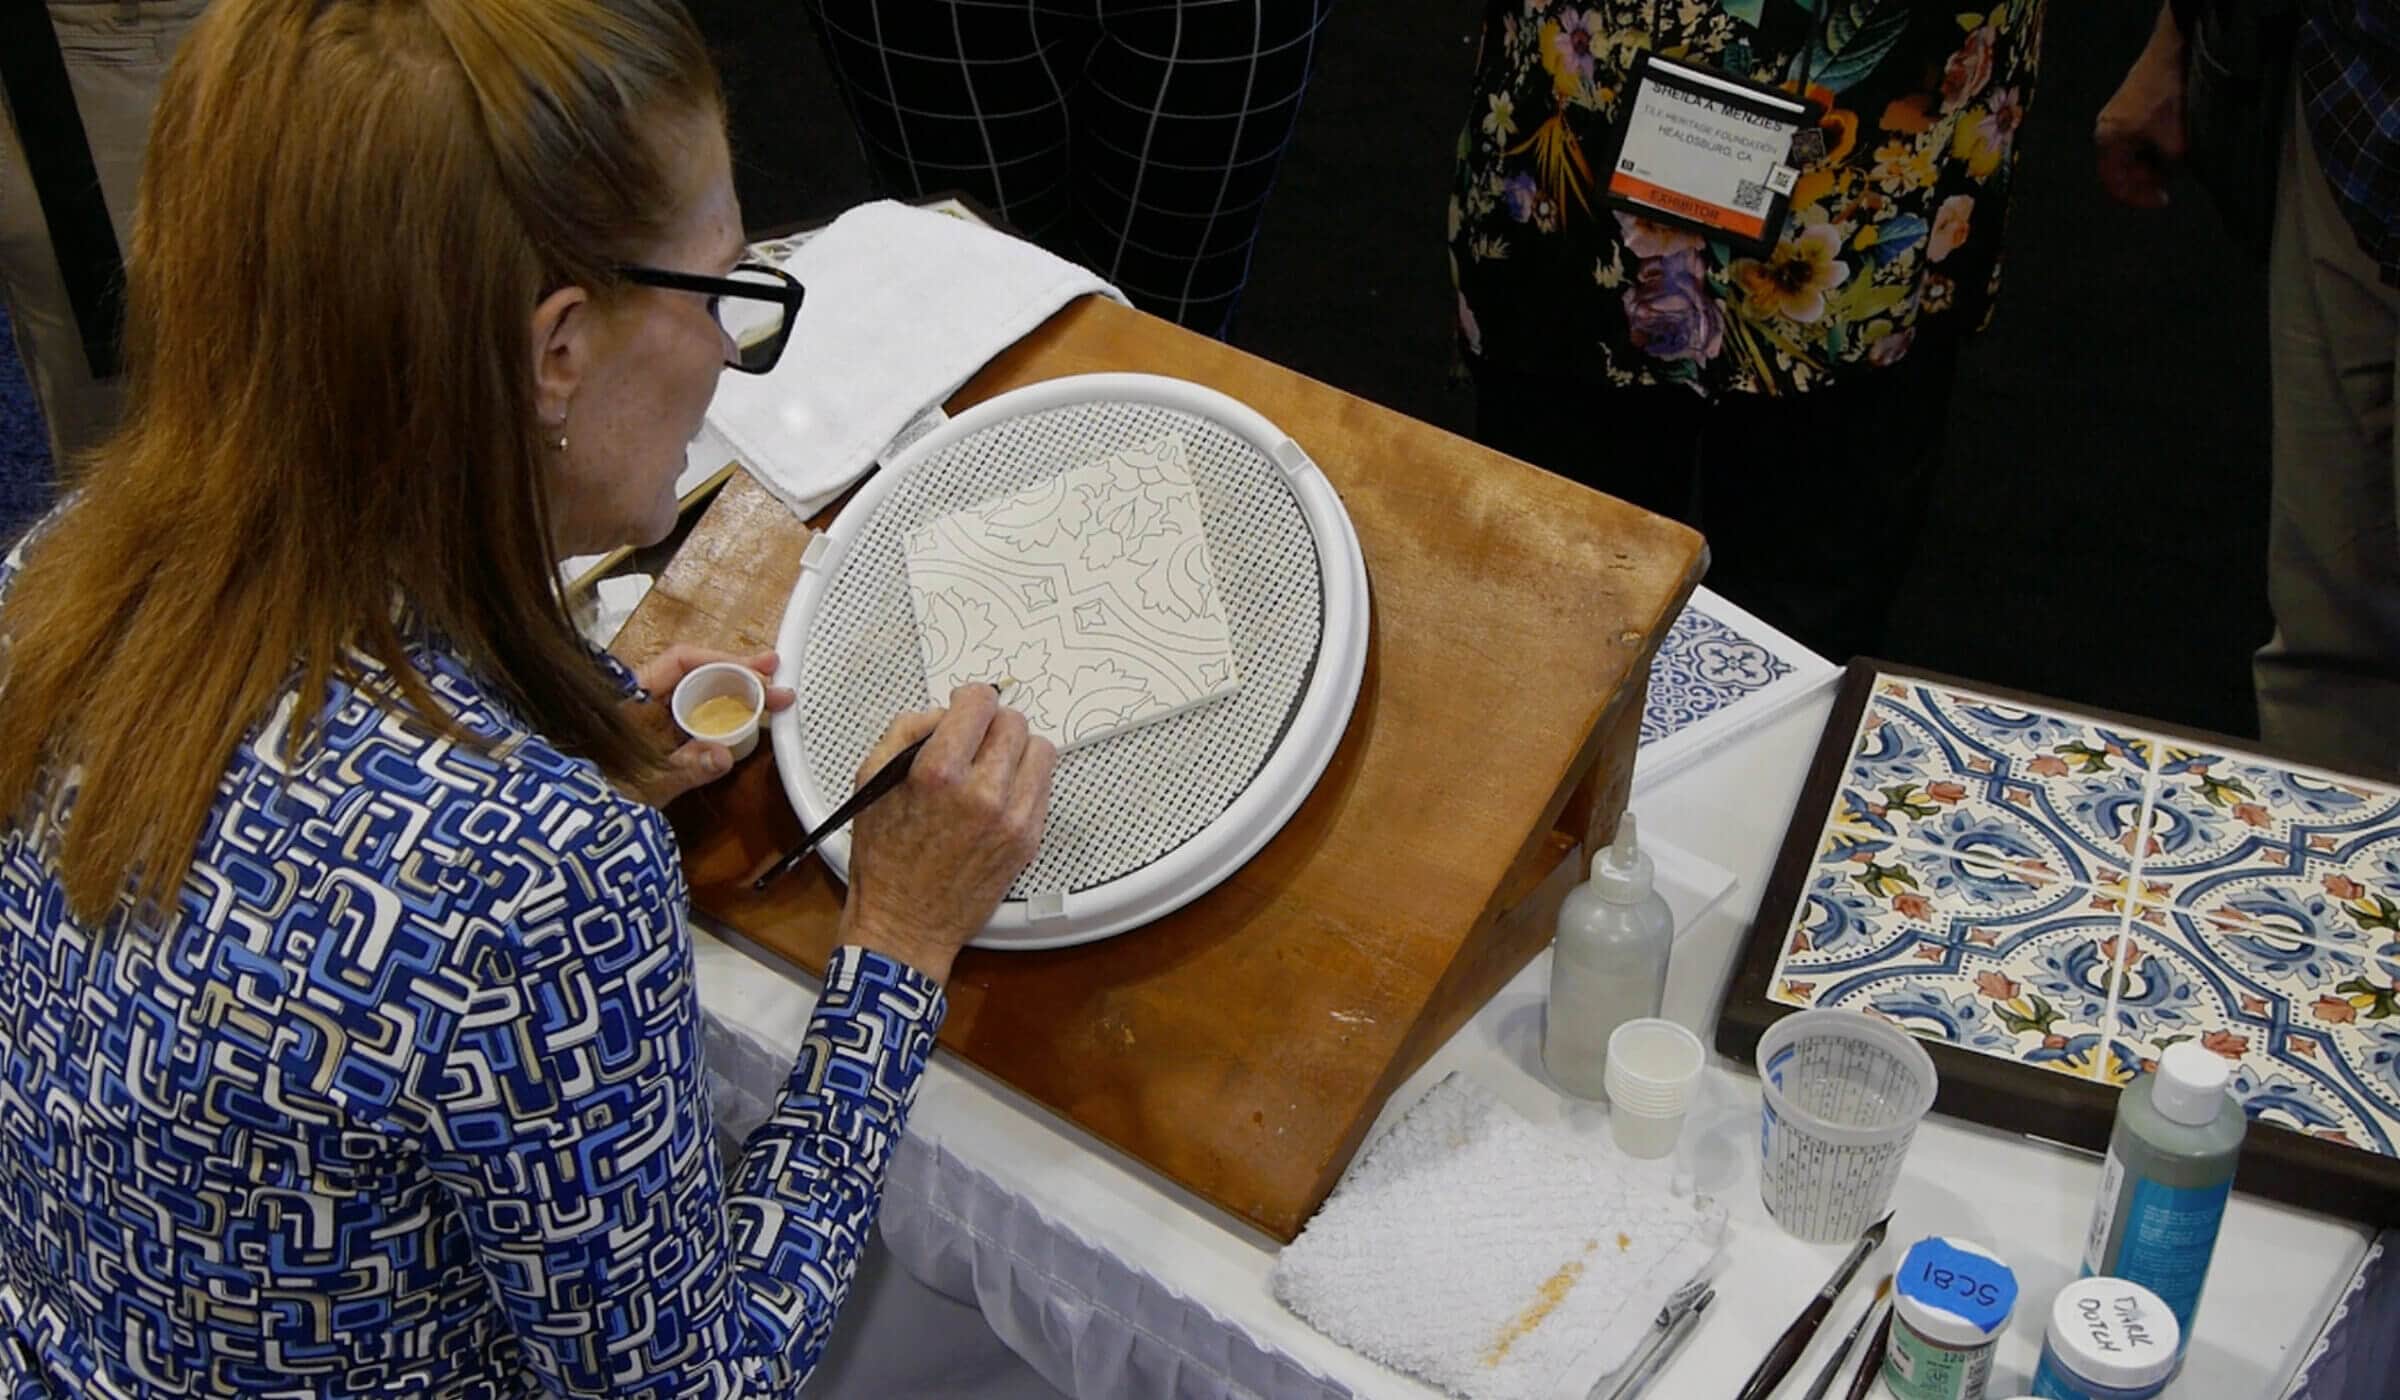 A woman seated at a table, carefully handpainting a tile with an intricate design. 